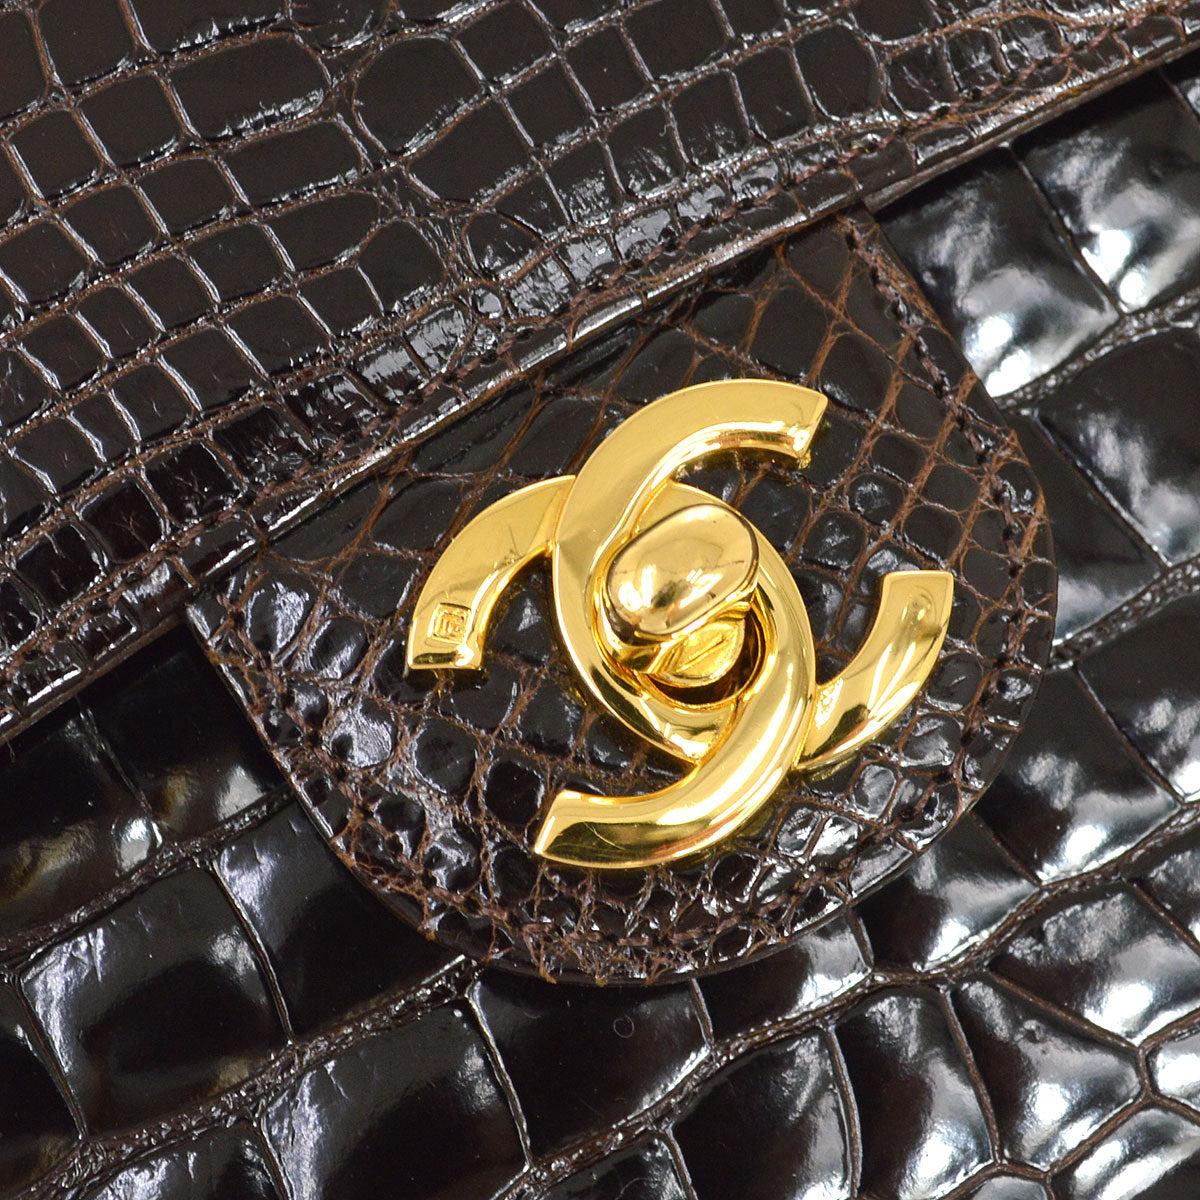 Pre-Owned Vintage Condition
From 1991 Collection
Crocodile Leather
Gold Hardware
Includes Authenticity Card, Dust Bag, Box
W 7